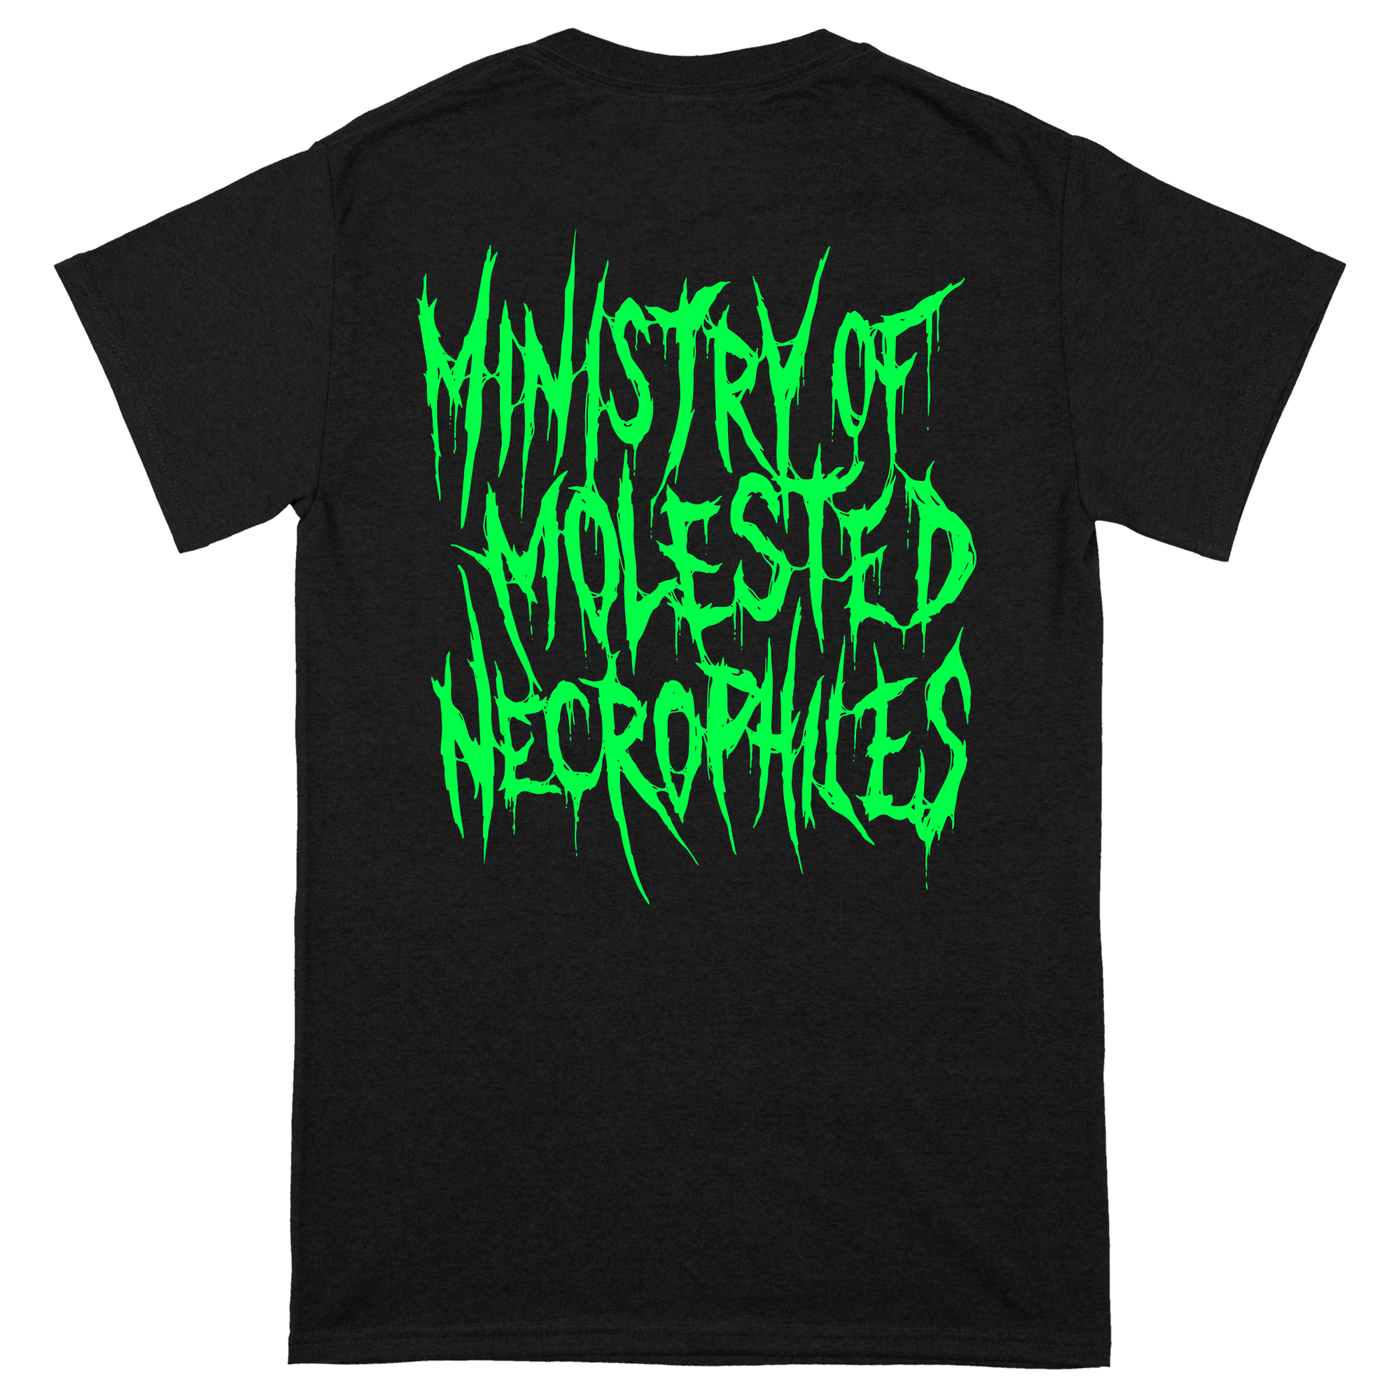 Pestilectomy 'Ministry Of Molested Necrophiles' T-Shirt